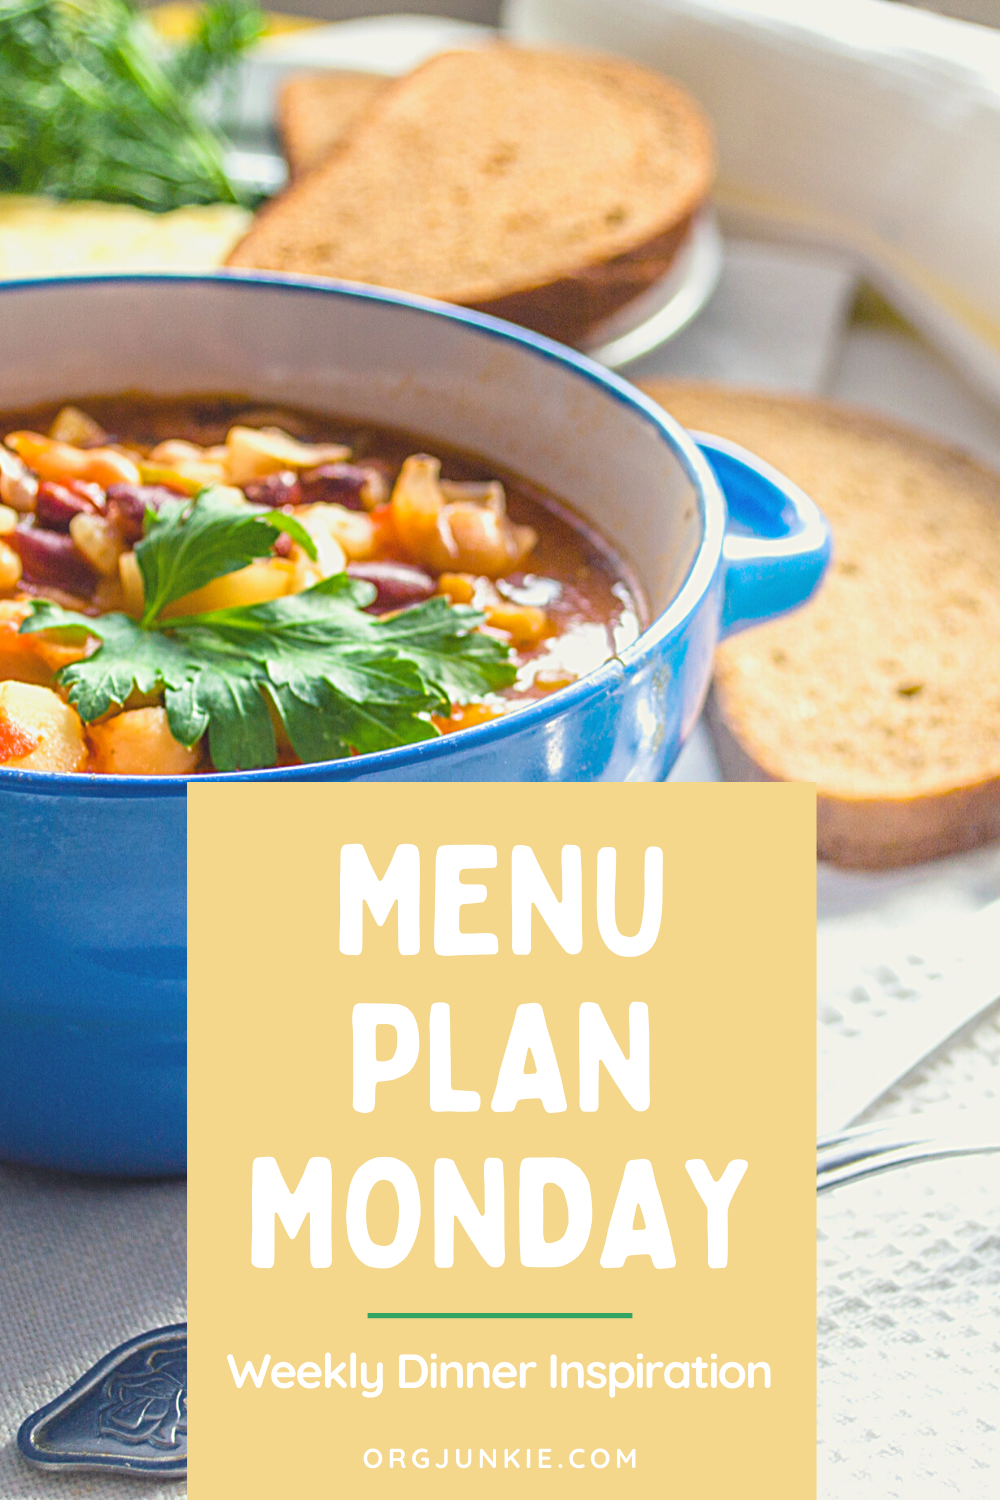 Menu Plan Monday for the week of Sept 21/20 ~ Weekly Dinner Inspiration at I'm an Organizing Junkie